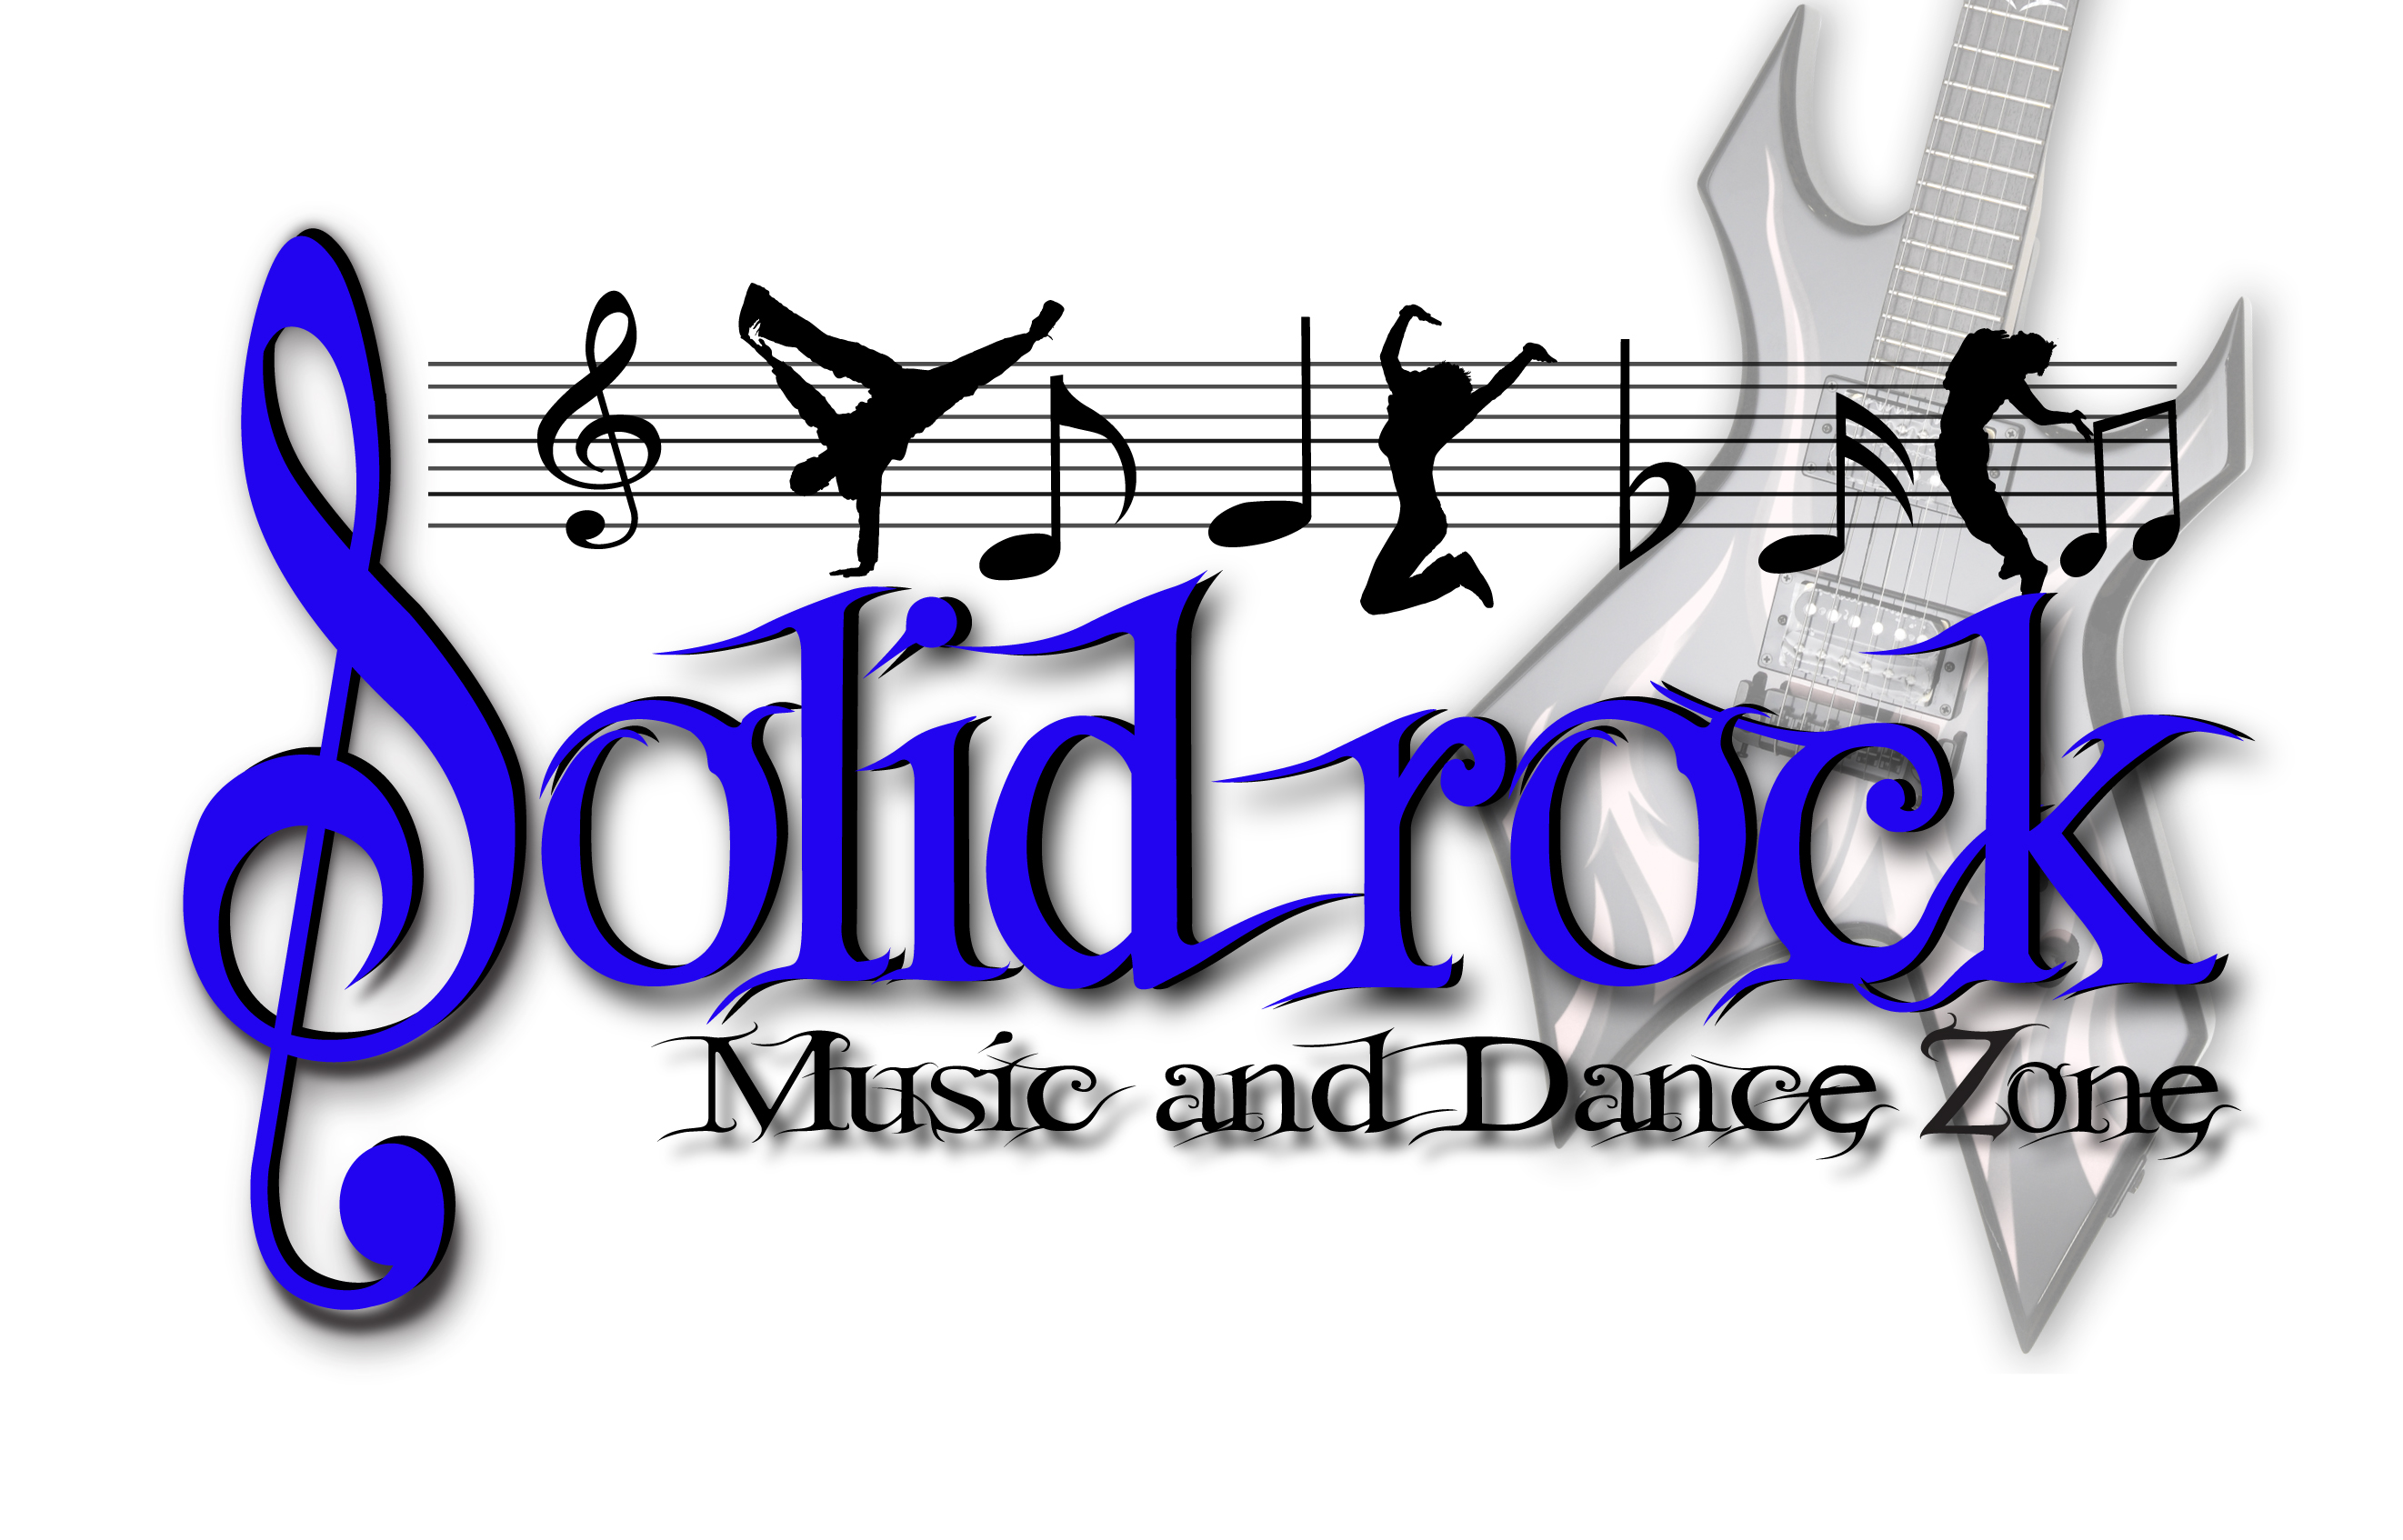 Solid Rock Music and Dance Zone Logo